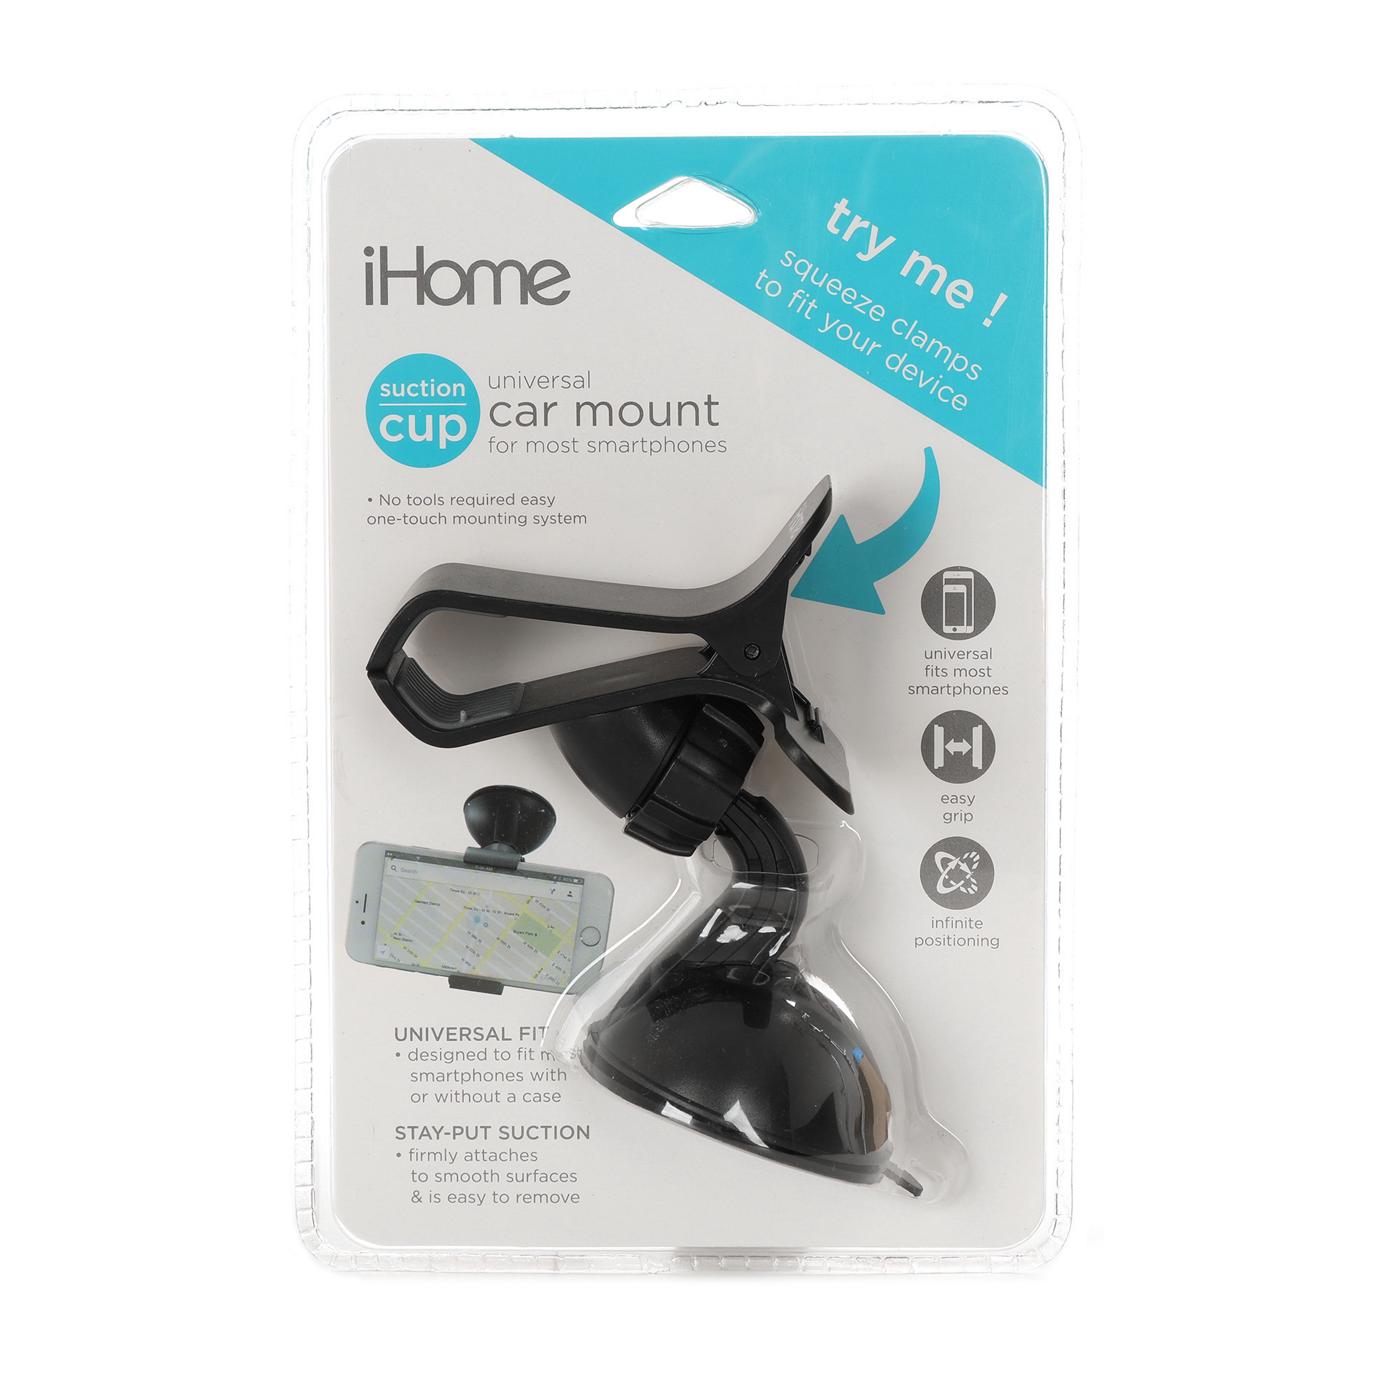 iHome Suction Cup Car Mount - Black; image 1 of 2